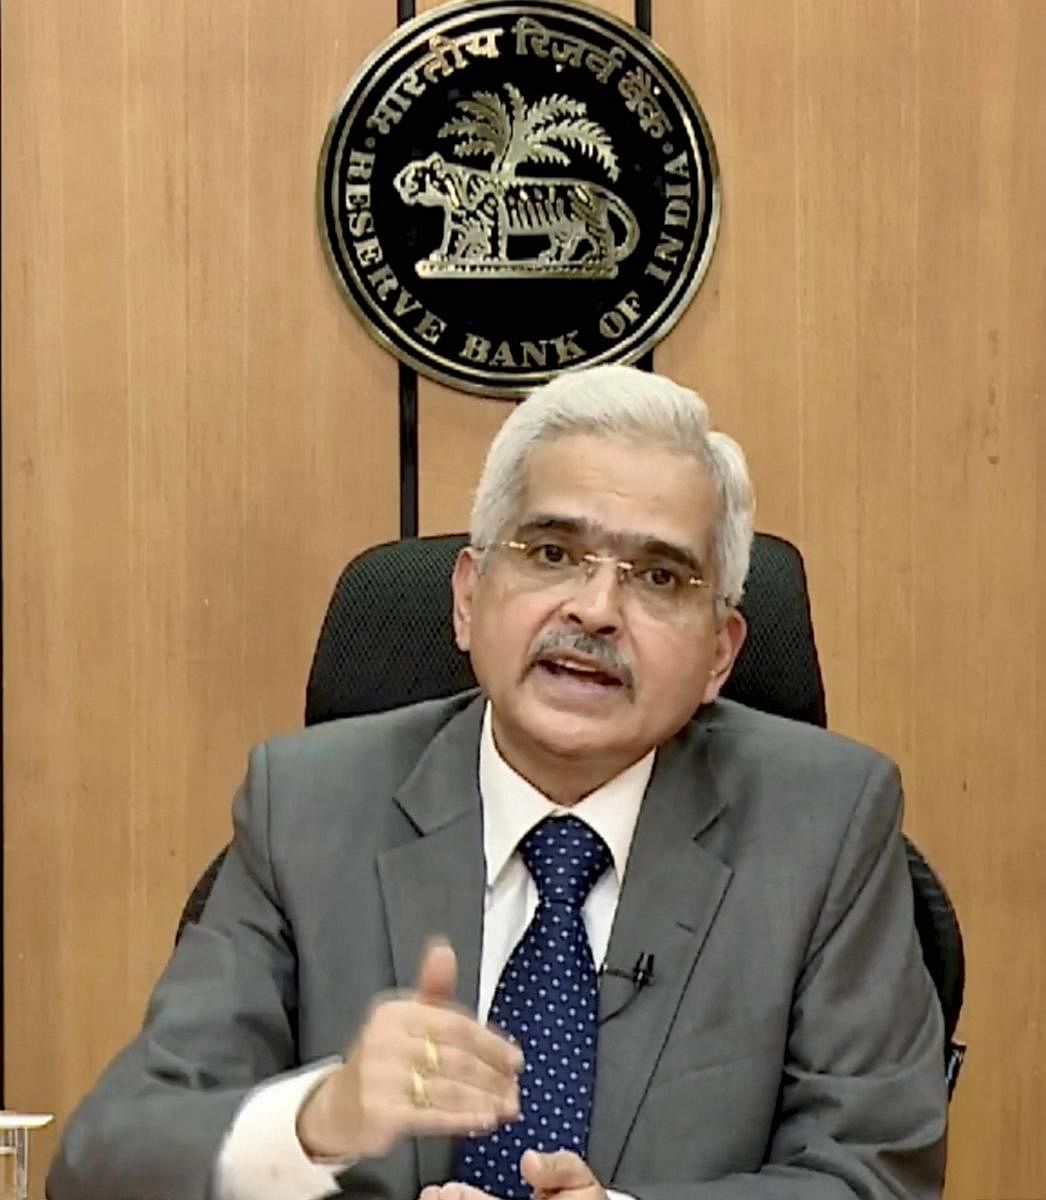 RBI Governor Shaktikanta Das addresses a press conference on the measures to ease the financial stress caused due to coronavirus pandemic, in New Delhi, Friday, May 22, 2020. (TV GRAB/PTI Photo) (PTI22-05-2020_000046A)